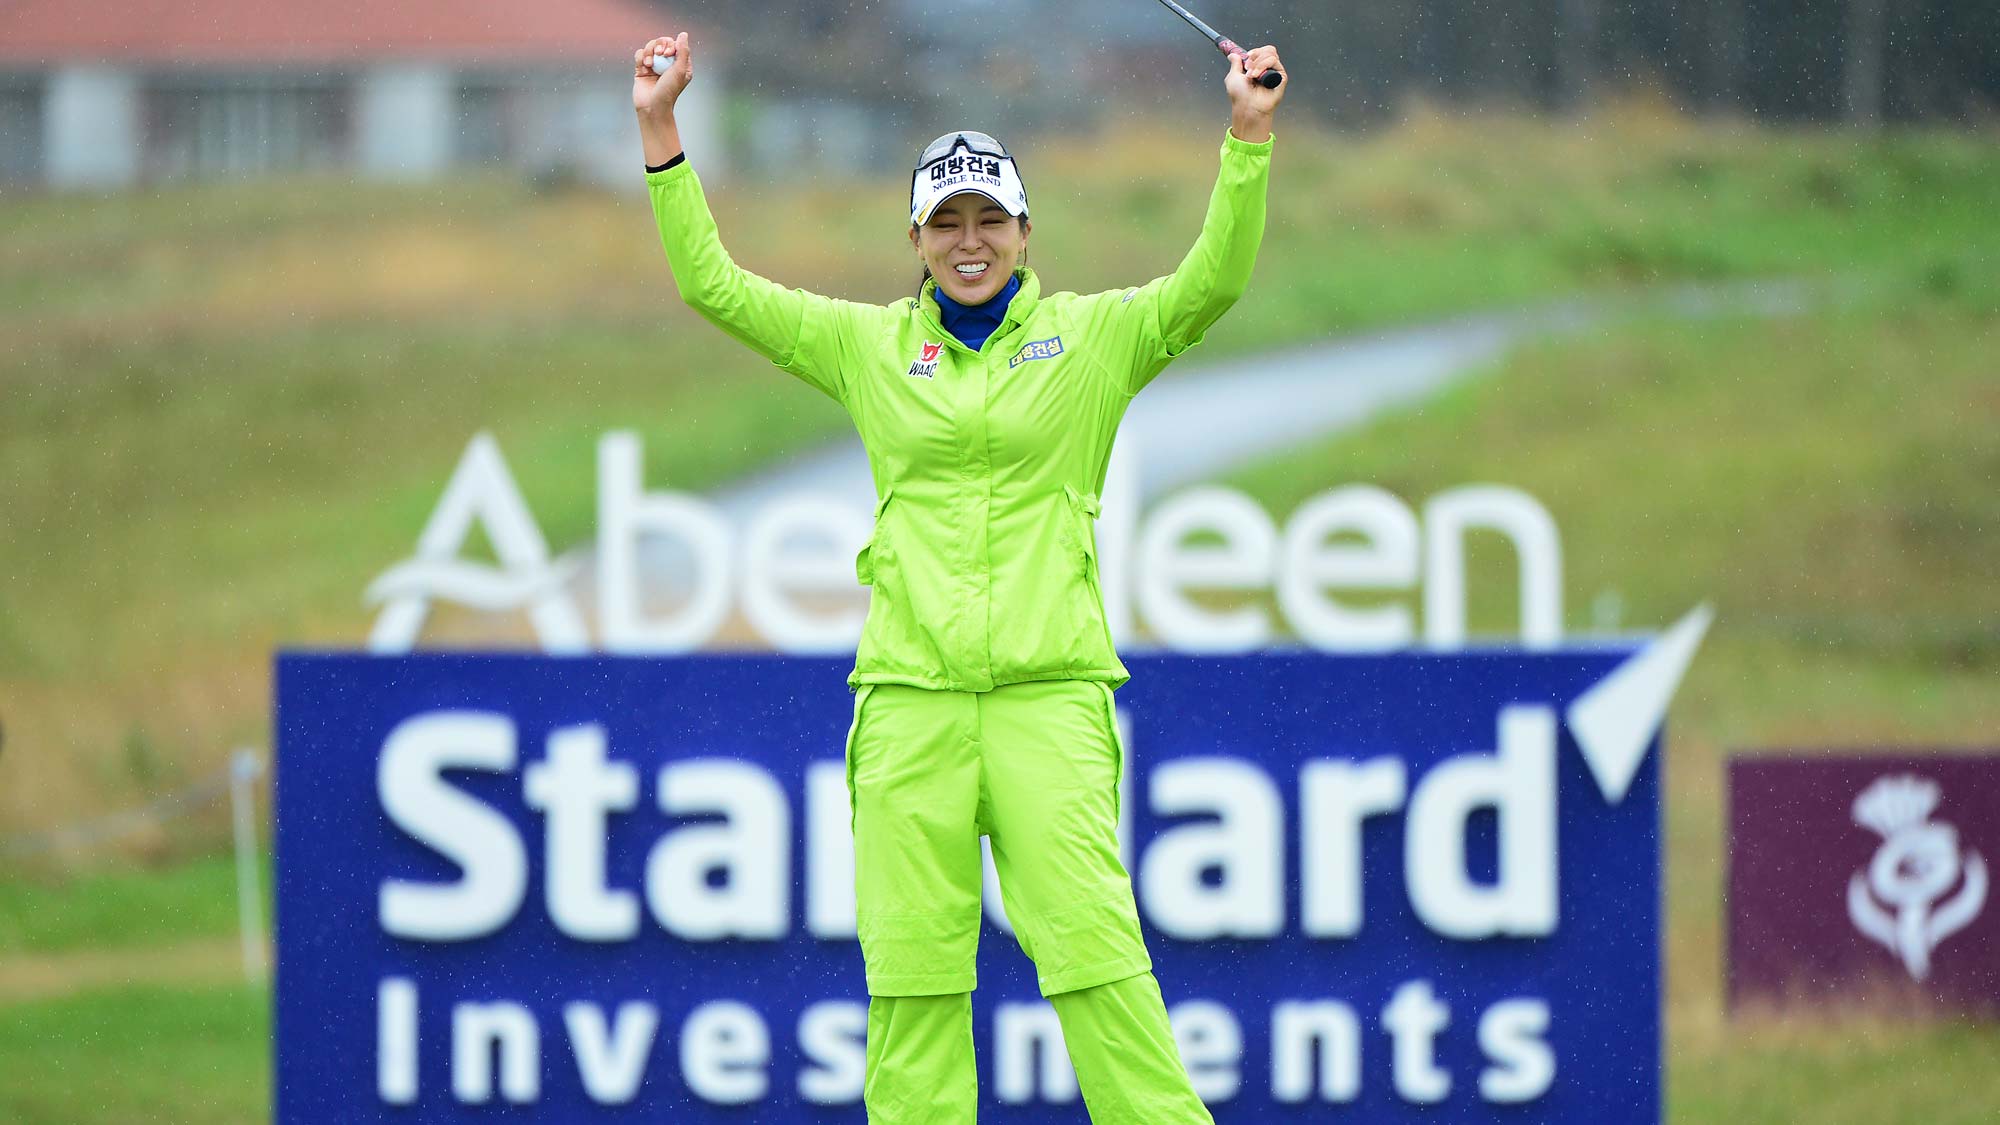 Mi Jung Hur of Korea celebrates after sinking her final putt at the 18th green to win the Aberdeen Standard Investment Scottish Open